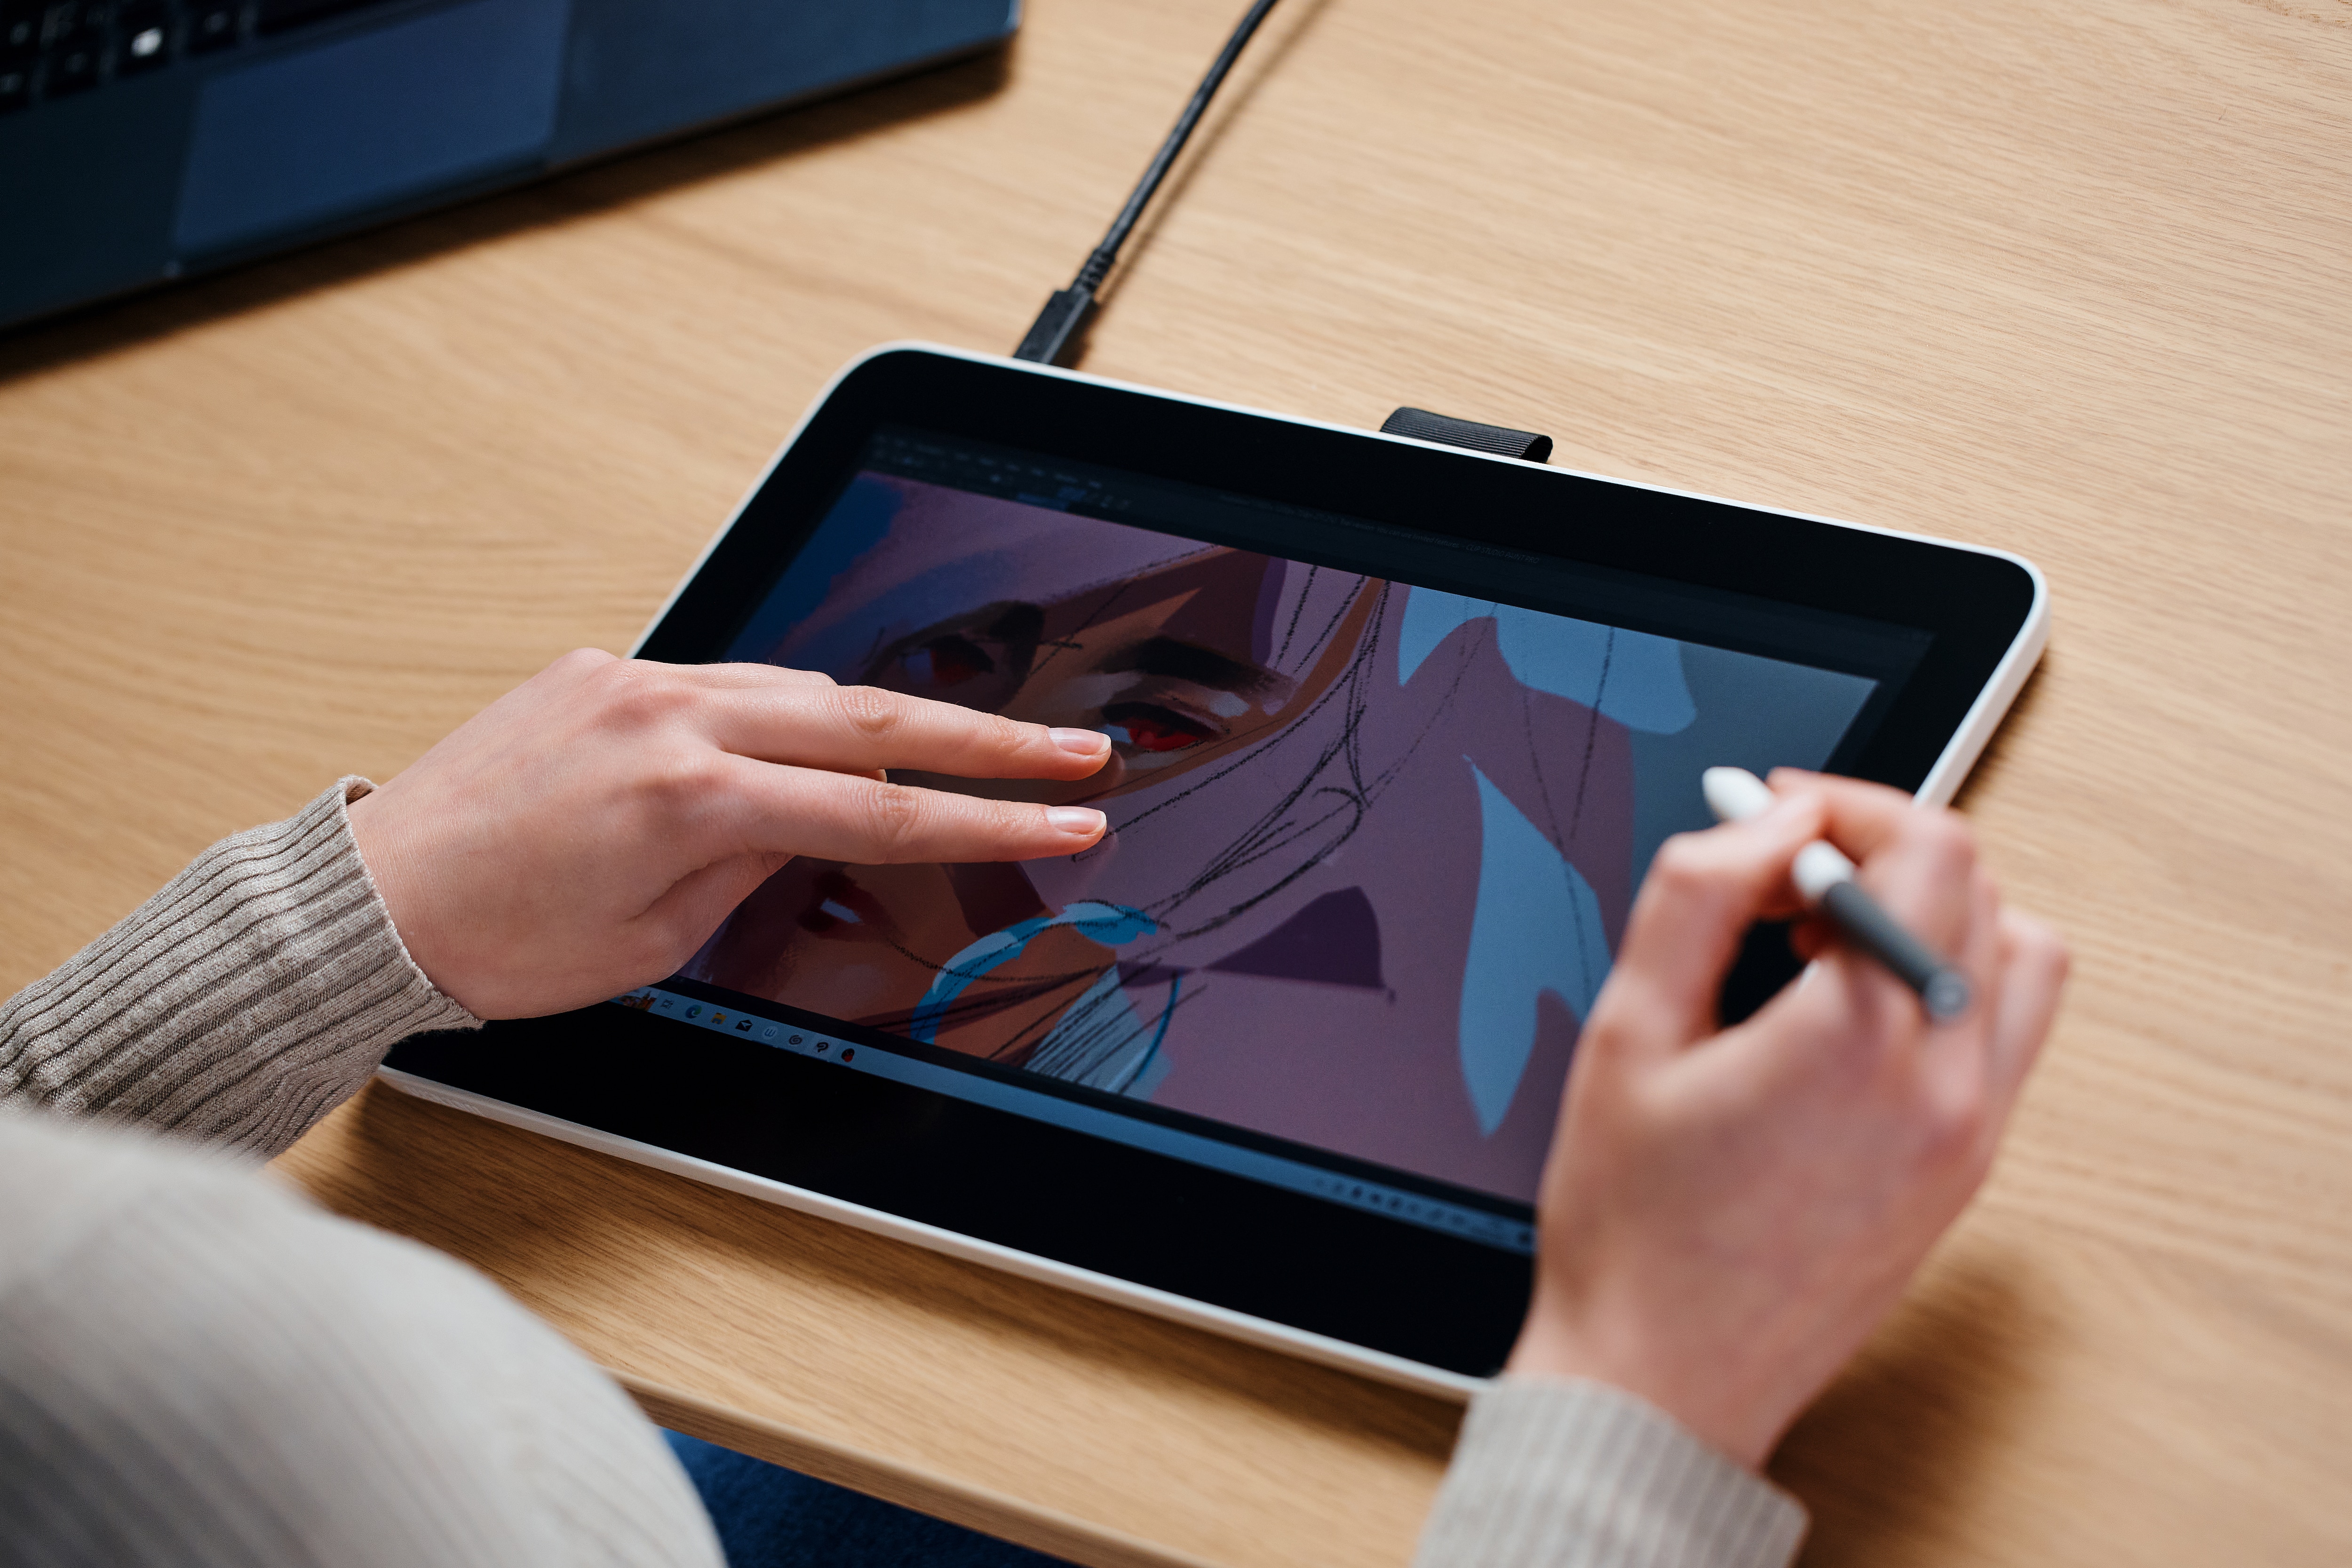 Wacom One 13 touch Stift-Display ++ Cyberport